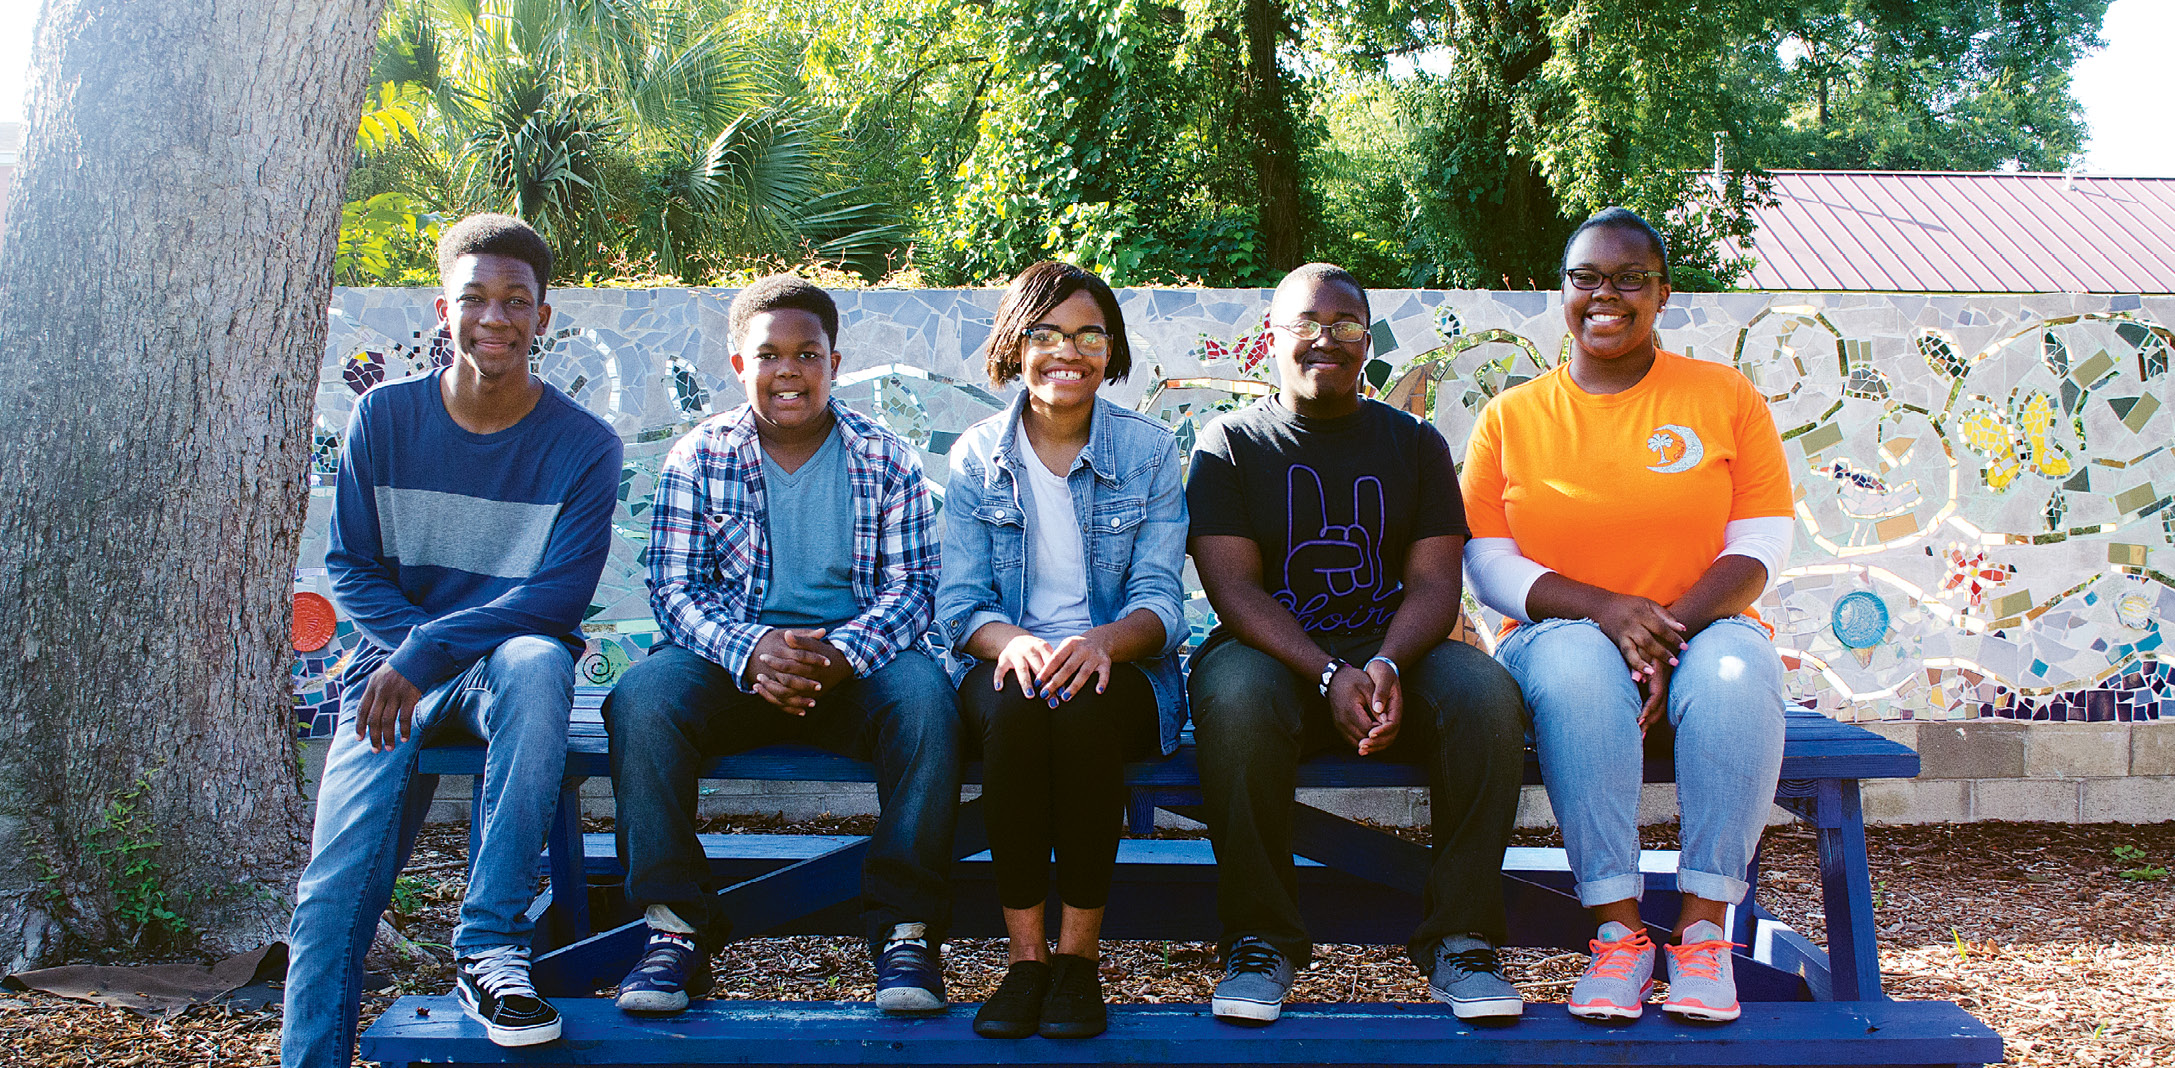 Robert Pickering III, Knicholas Pickering, Brianna Stanley, Chandler Threatt, and Reagan Pickering are among the teens who tend the downtown garden.